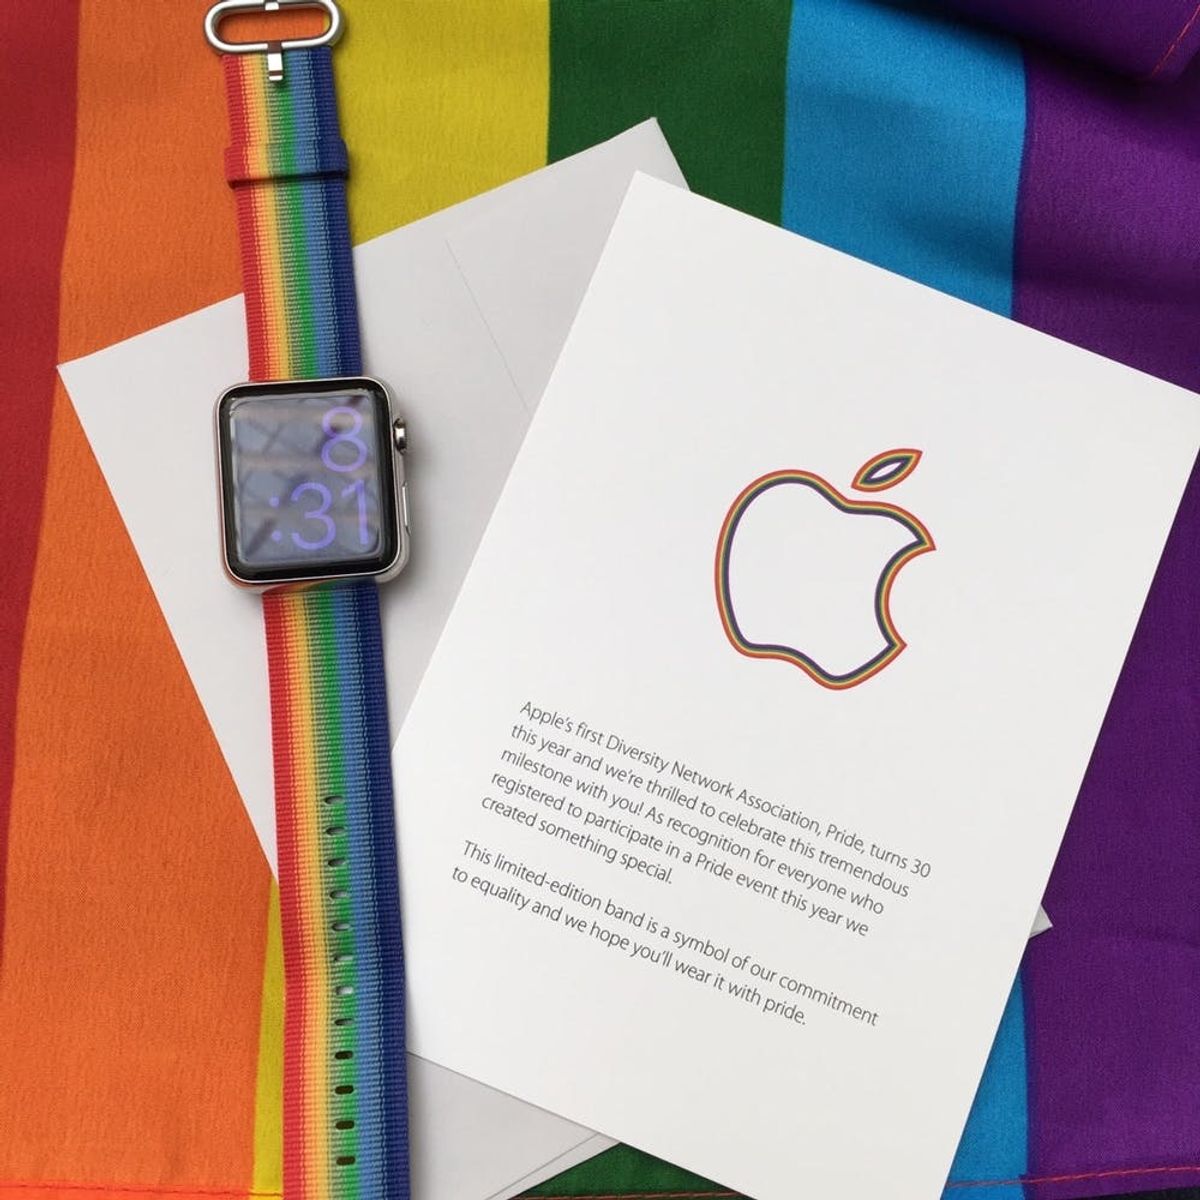 You’ll Want This Employee-Exclusive Apple Pride Watch Band